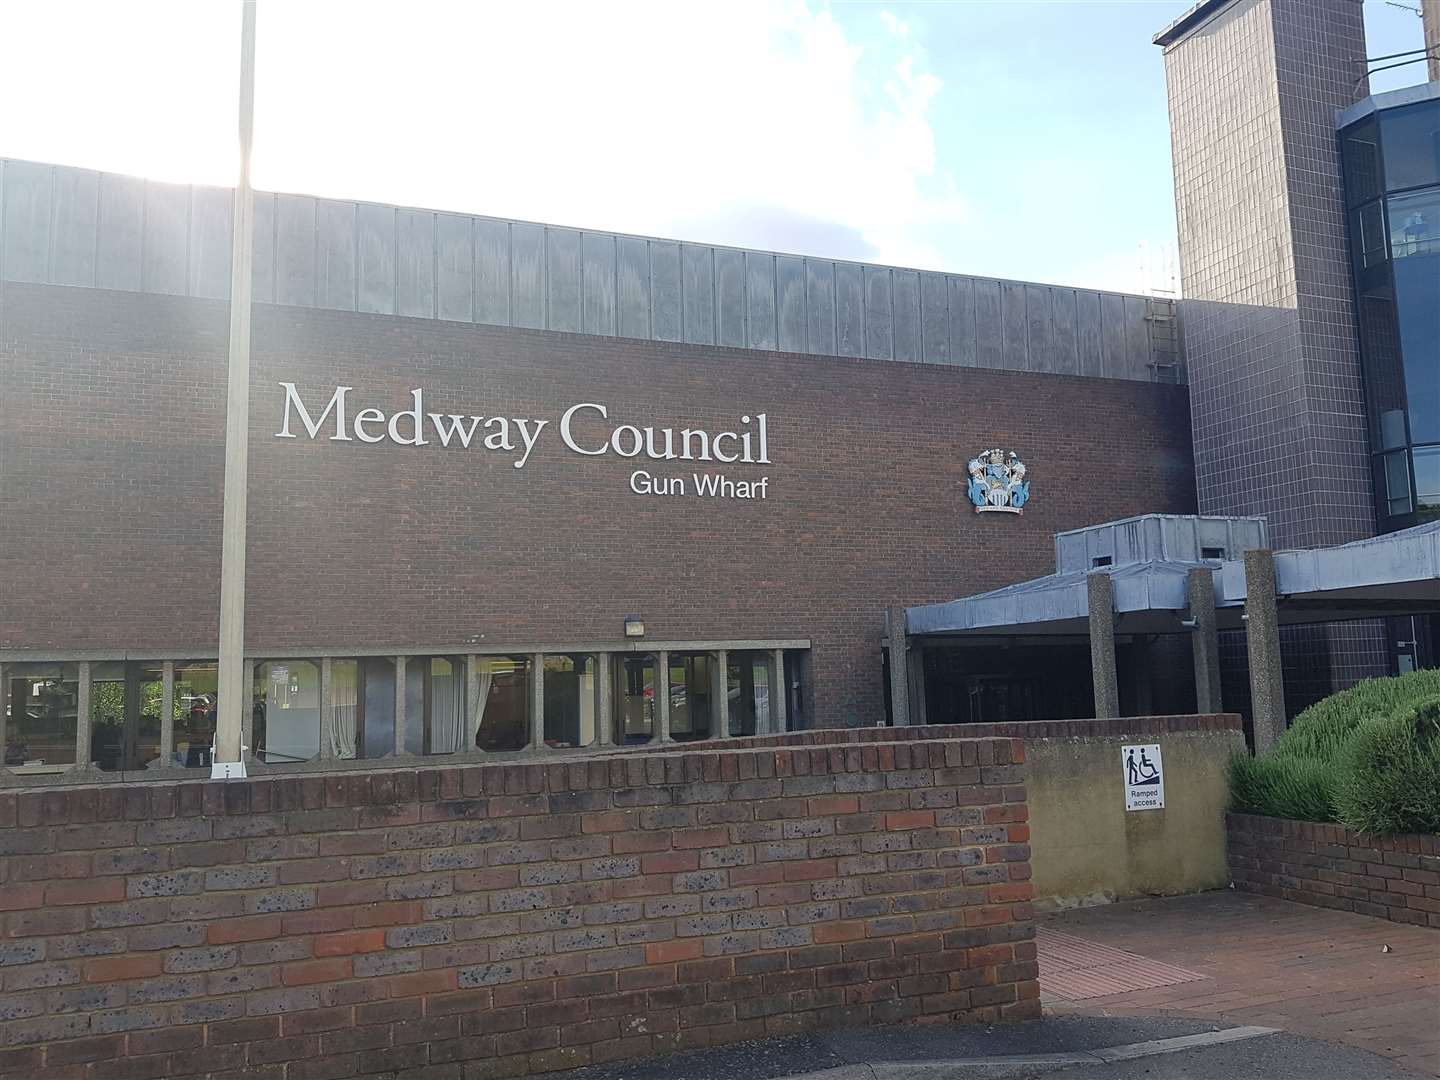 Gun Wharf is the home of Medway Council (30698884)